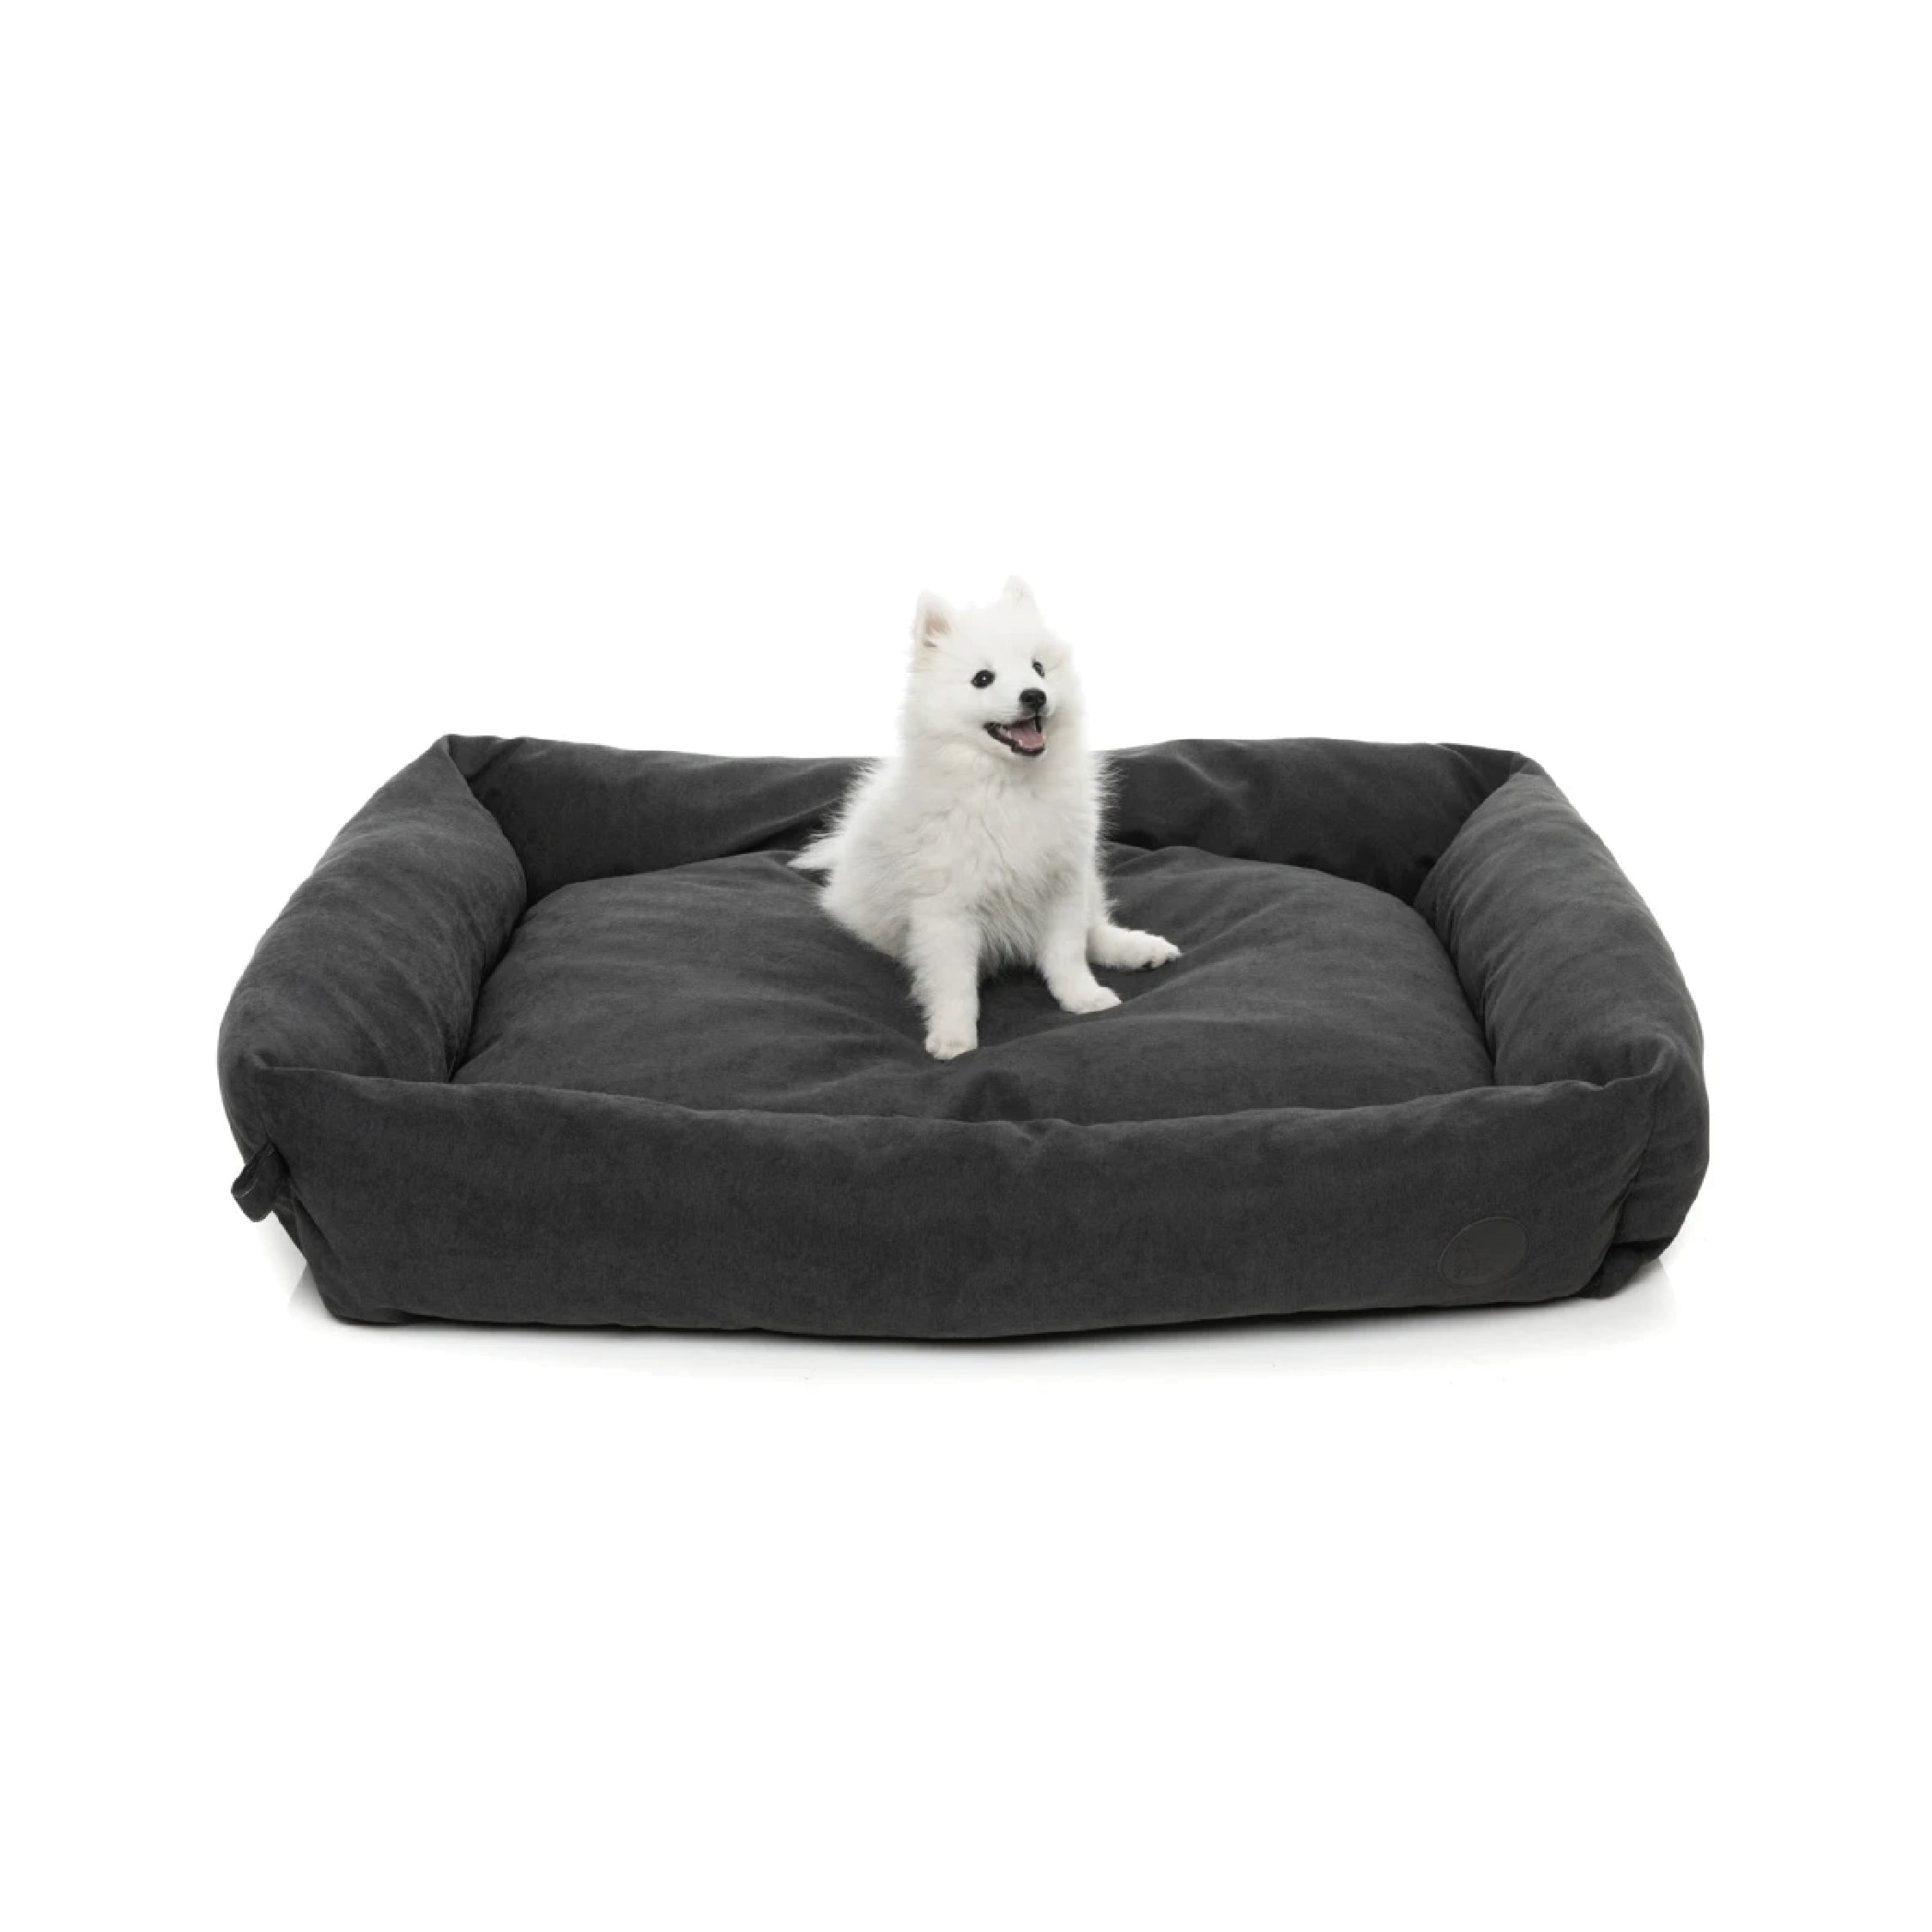 FuzzYard The Lounge Charcoal Dog Bed